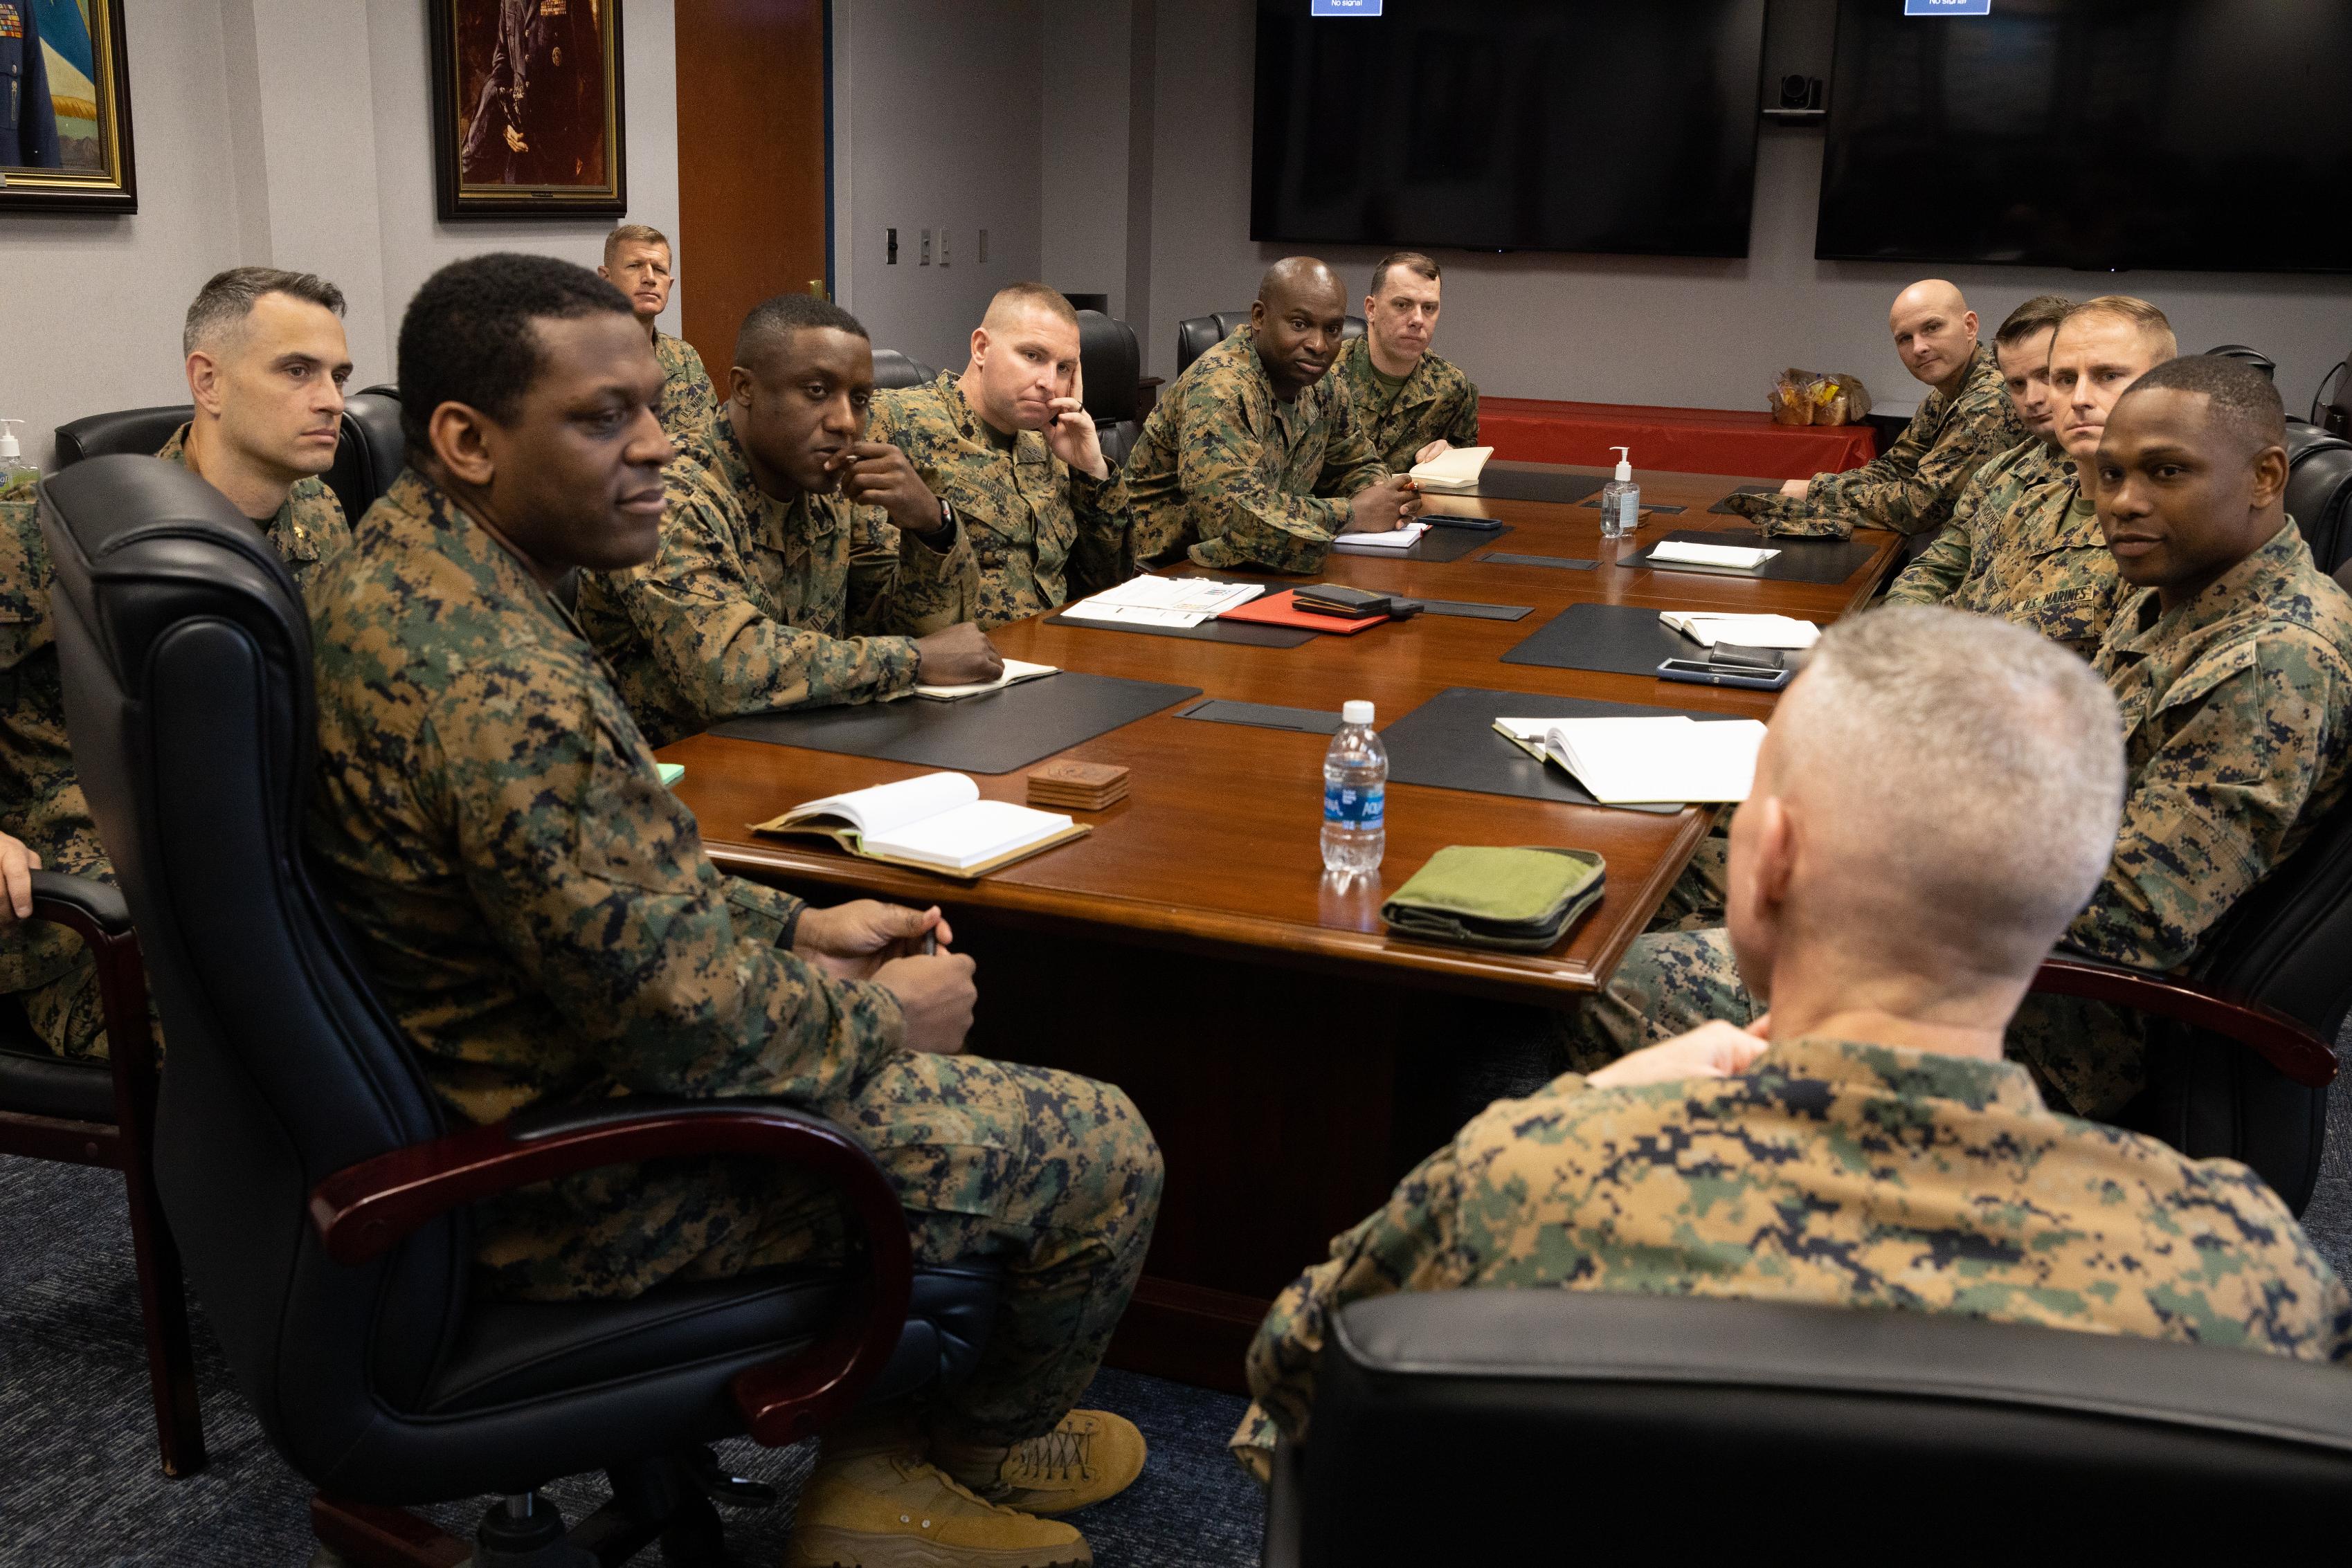 U.S. Marine Gen. Eric M. Smith, the Assistant Commandant of the Marine Corps, speaks with Marines from Marine Corps Recruiting Station Montgomery and Weapons Company, 3rd Battalion 23rd Marines at Maxwell Air Force Base in Montgomery, Alabama, Feb. 10, 2023. The purpose of this visit was to communicate with the Marines to address questions and concerns about improving the force. (U.S. Marine Corps photo by Sgt. Shannon Doherty)